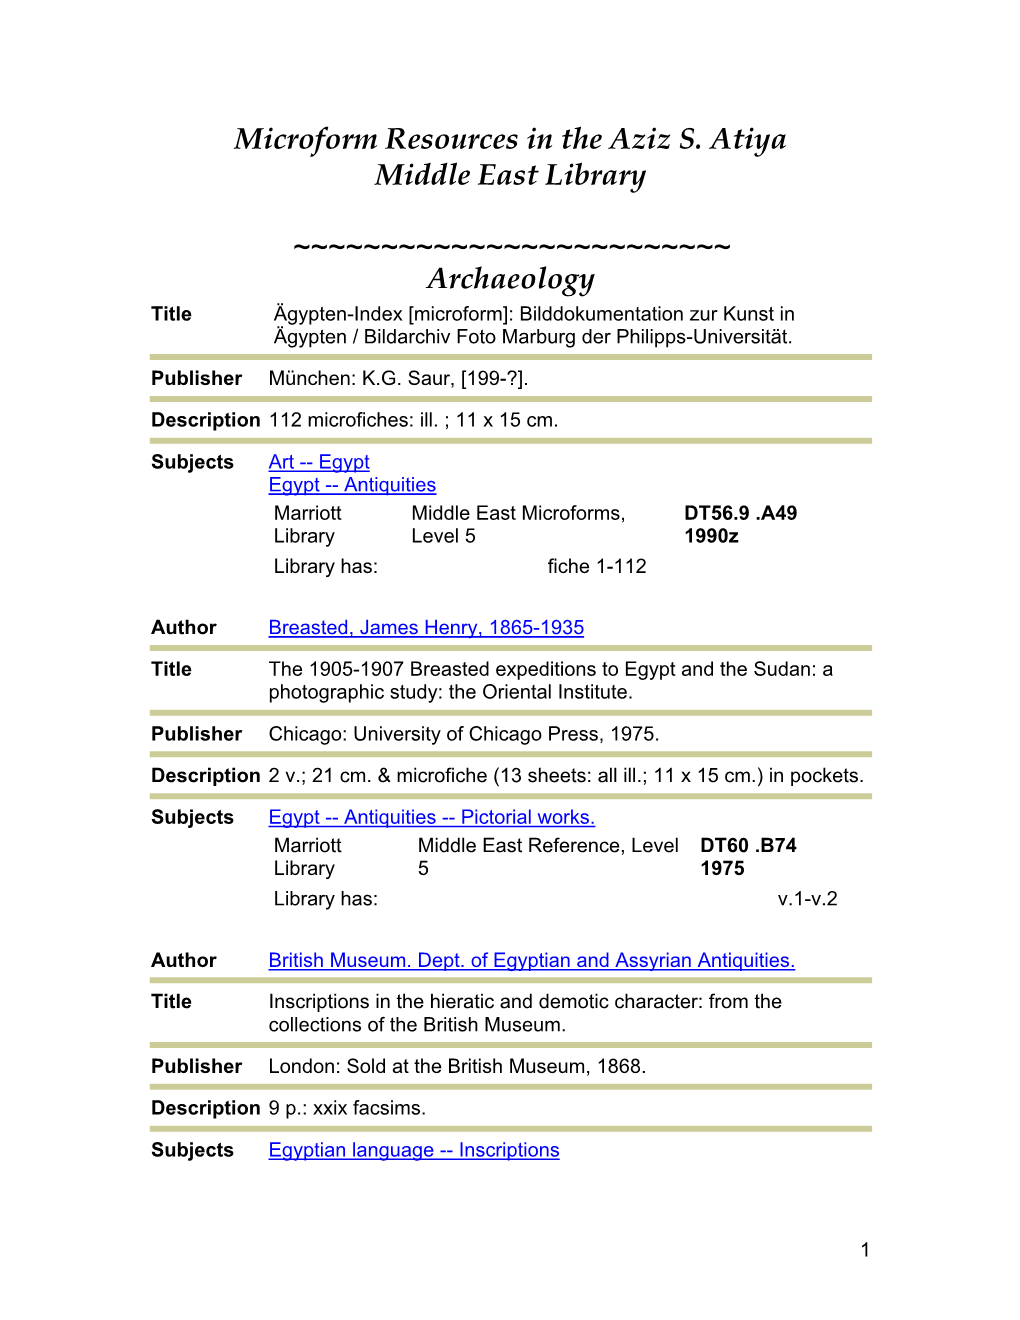 Microform Resources in the Aziz S. Atiya Middle East Library